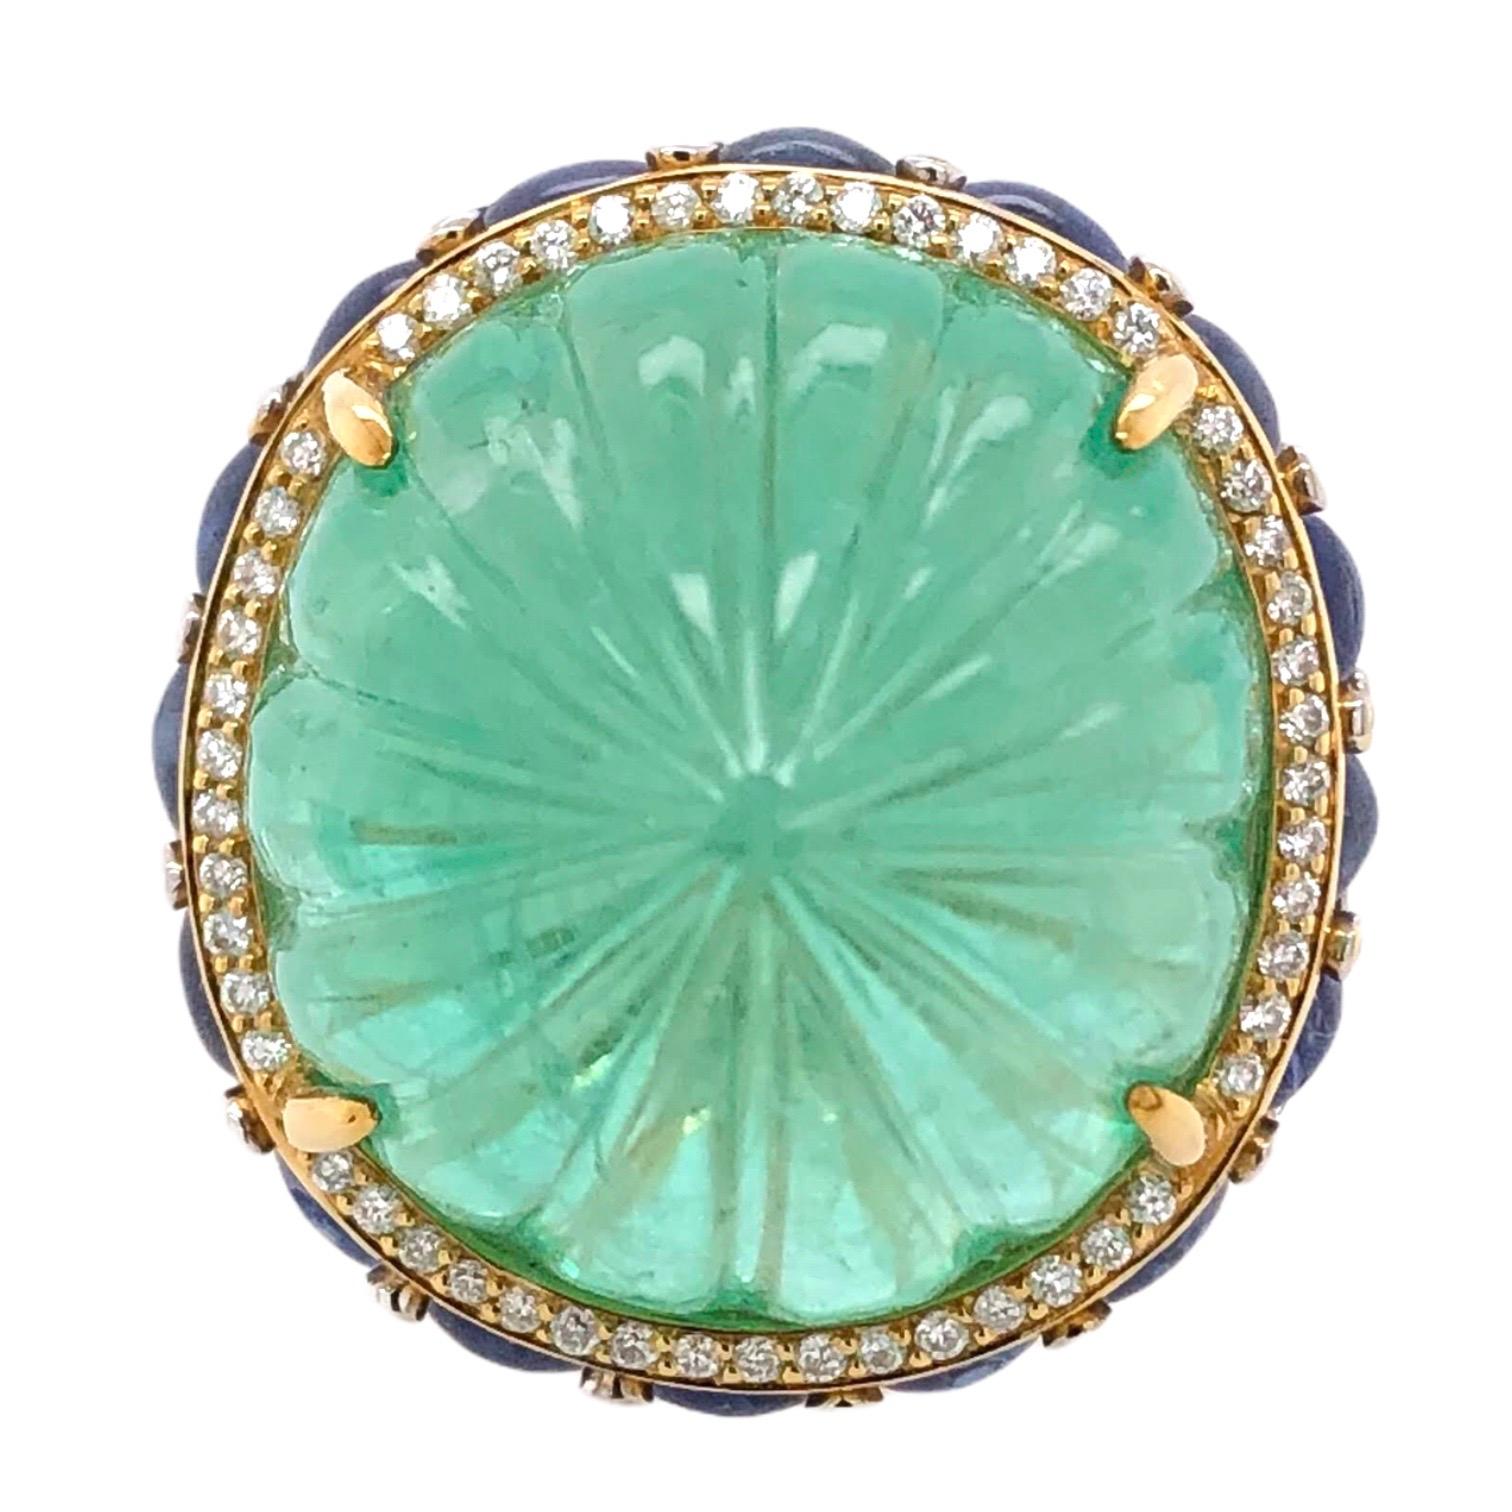 48.00ct GRS Certified Colombia Emerald Ring with Cabochon Sapphires and Diamonds.

- 1 GRS Certfieid Colombia Emerald/48.00ct
- Cabochon Light Blue Sapphires
- Round Diamonds
- 18K Yellow Gold
- Size of ring fitted to finger.

Designed and crafted